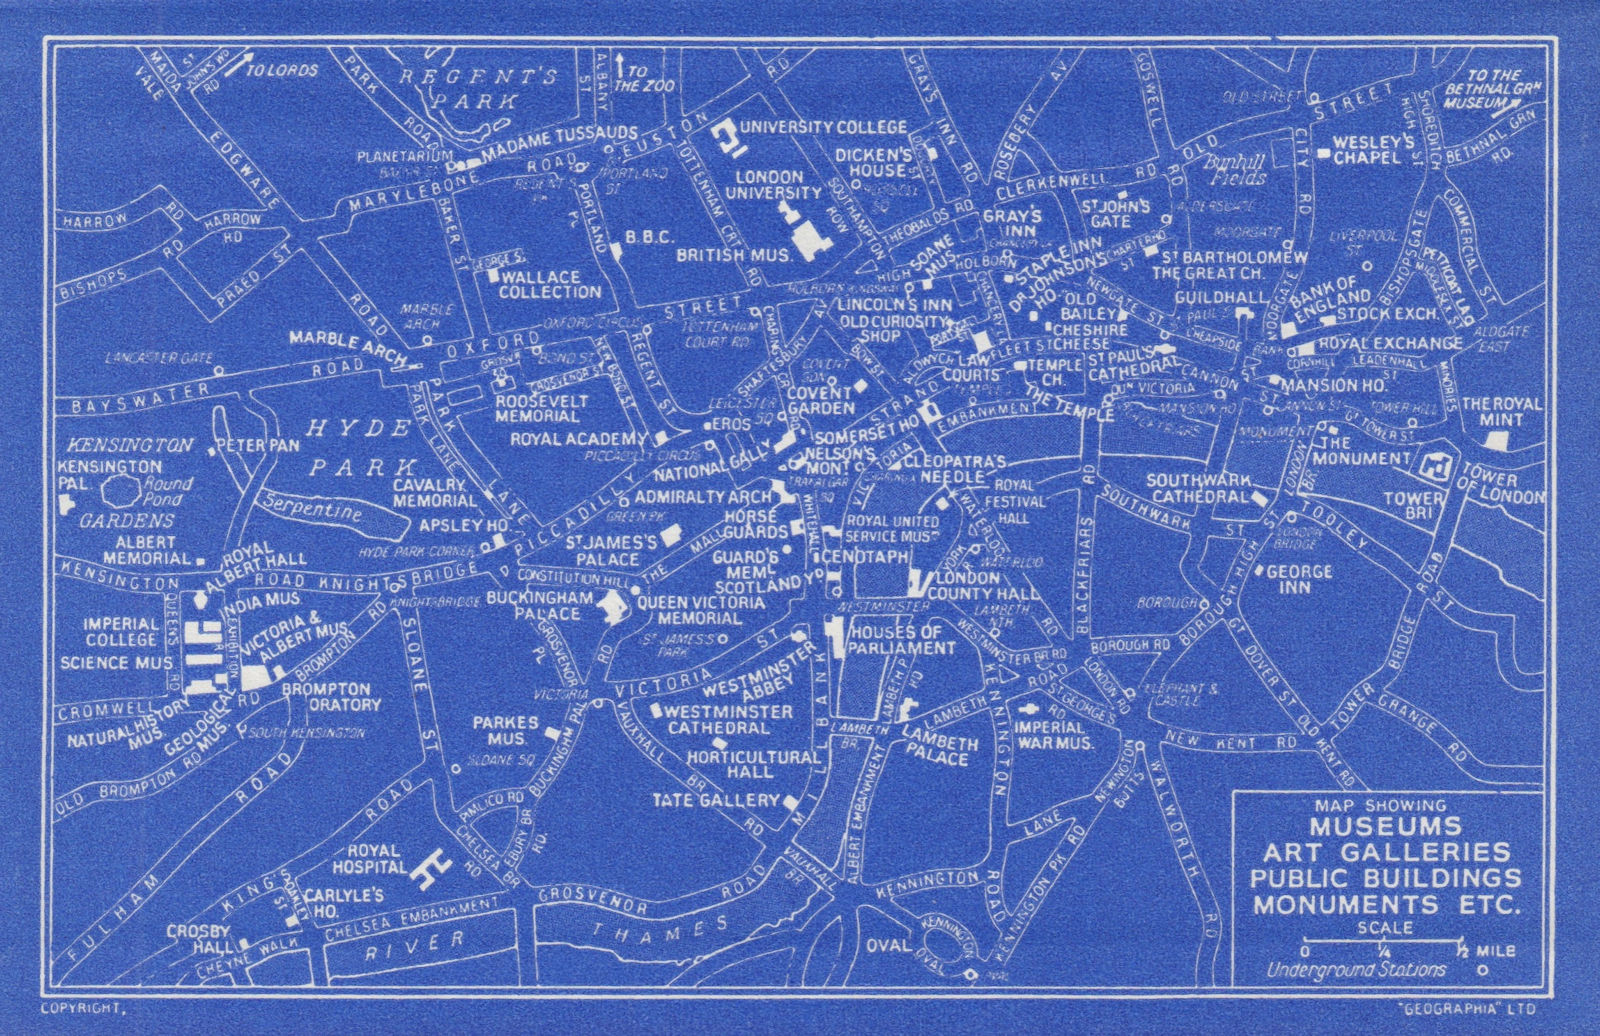 LONDON Museums Art Galleries Public Buildings Monuments attractions 1965 map